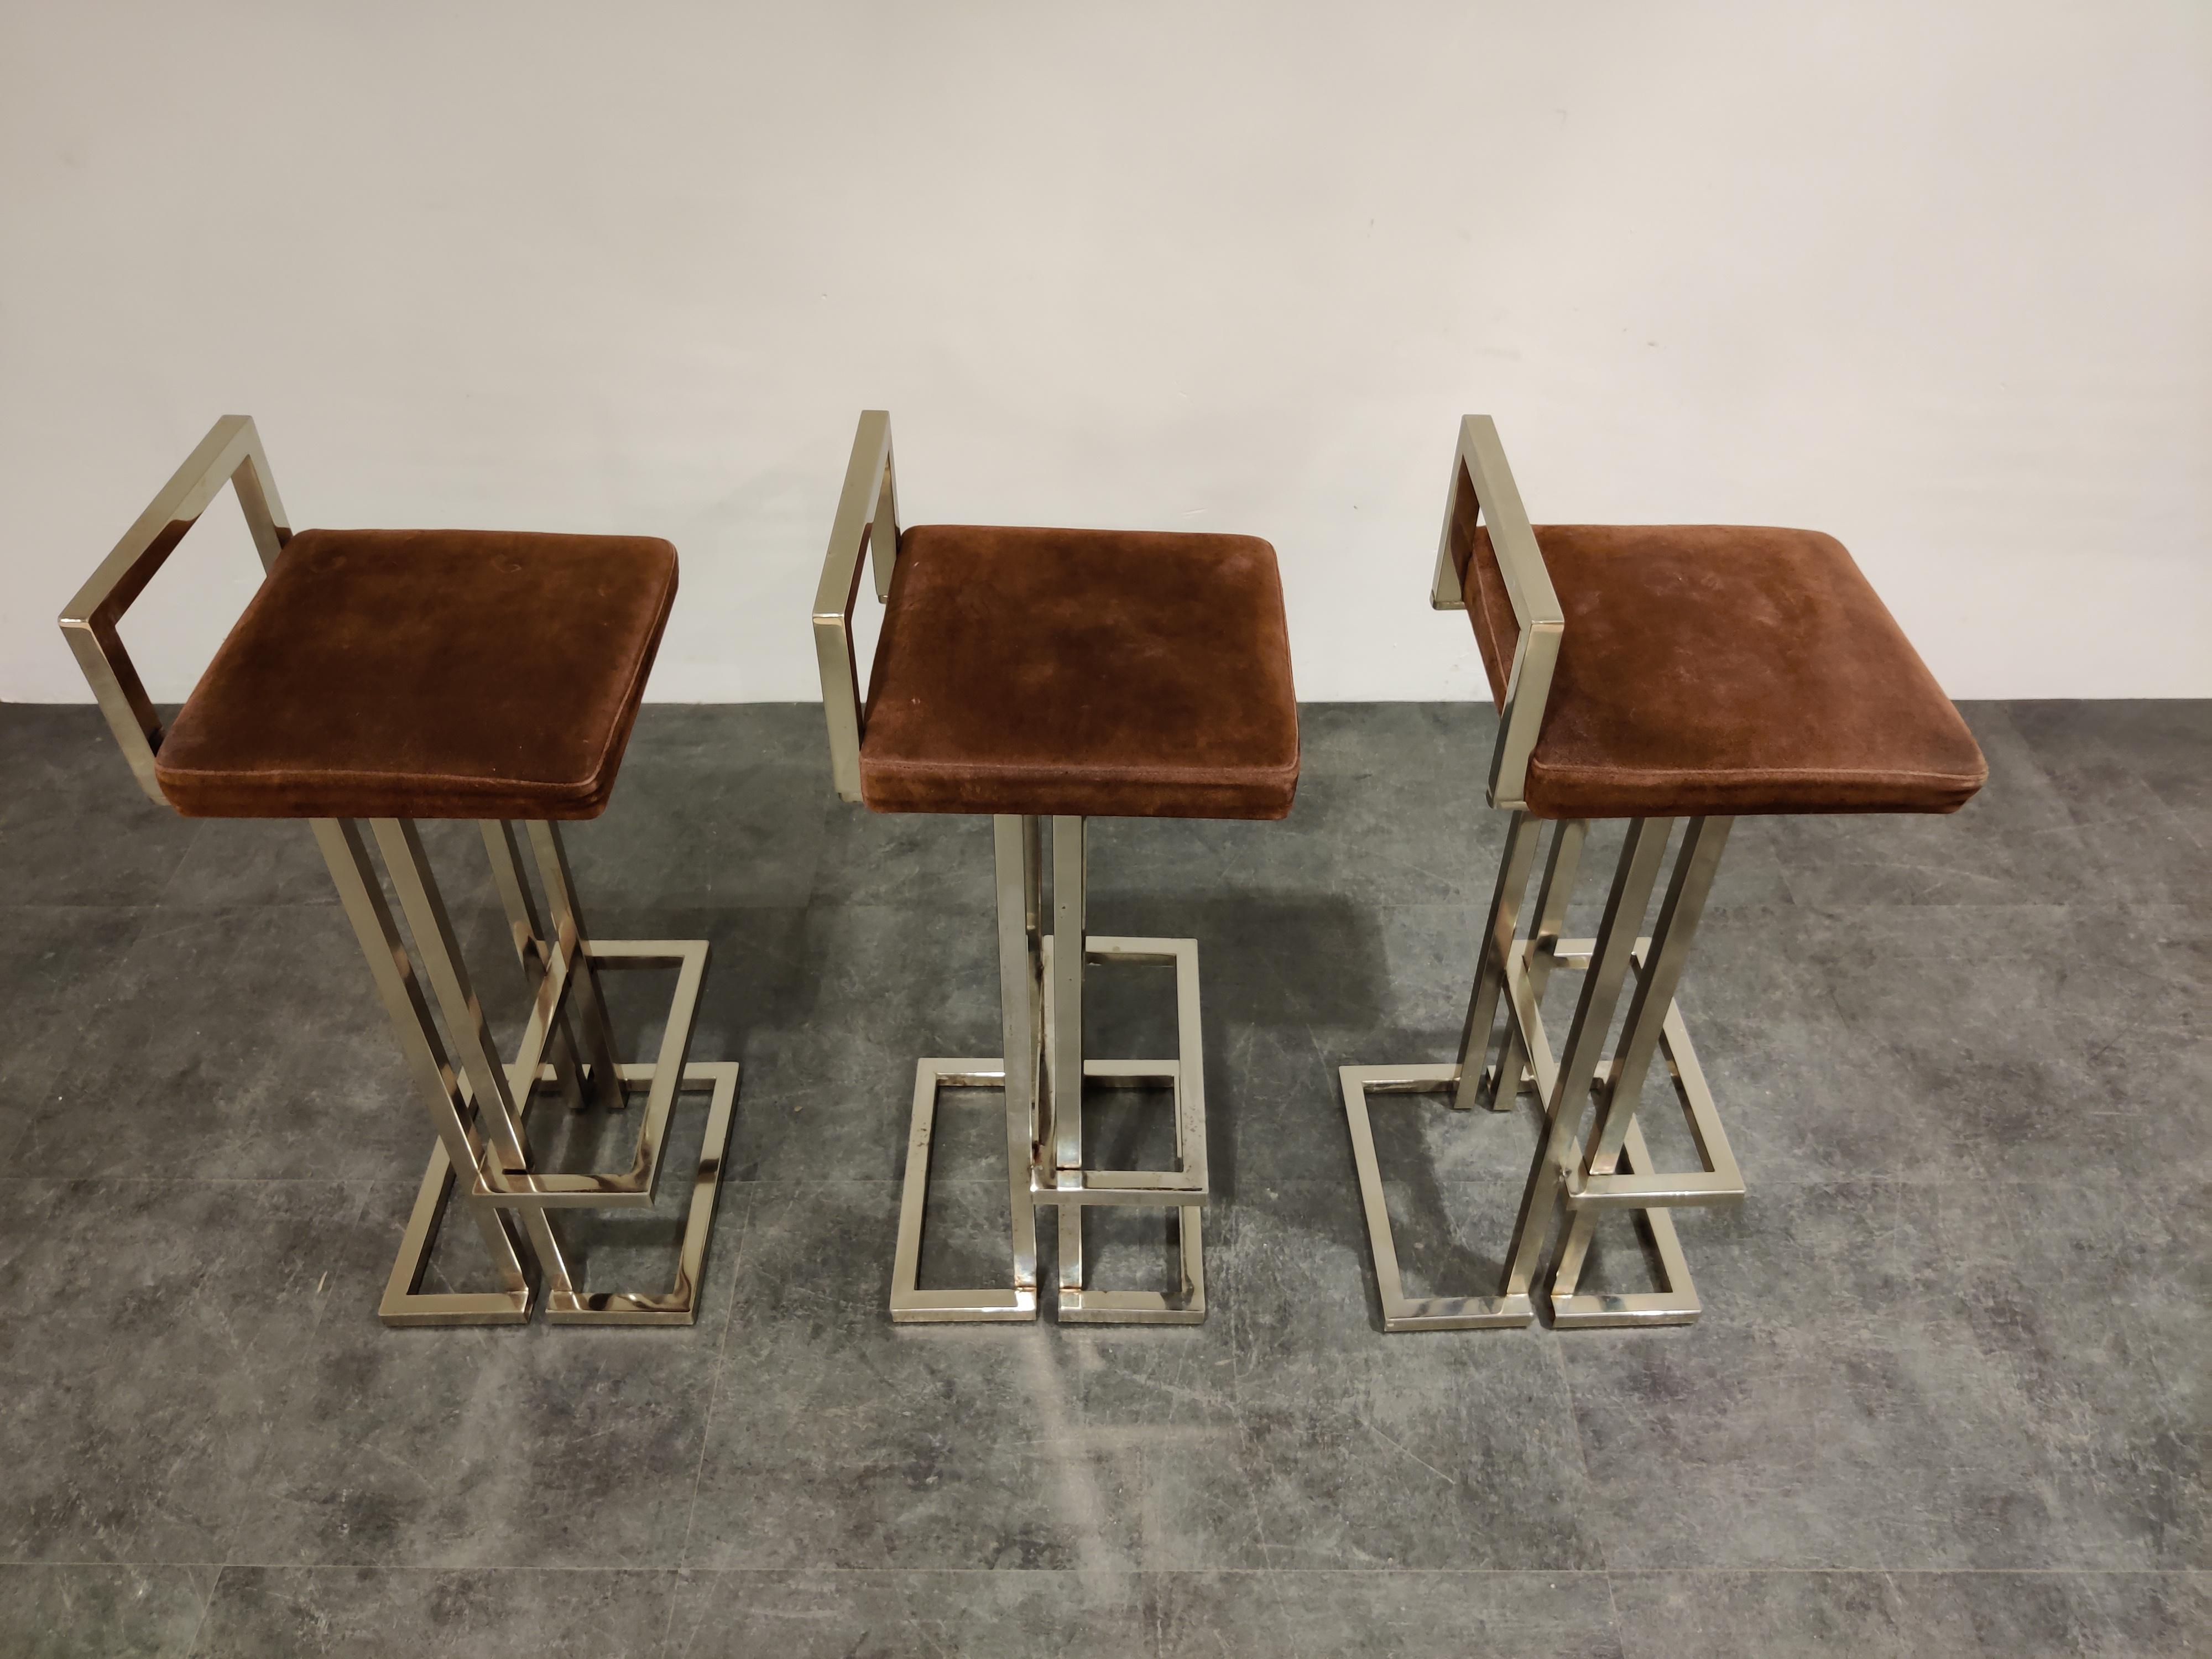 Beautiful original chrome and suede bar stools by Belgochrom.

Beautiful timeless design with a luxury appeal.

They have their original brown suede upholstery which mixes well with the chrome frame.

The chrome has been polished, although it